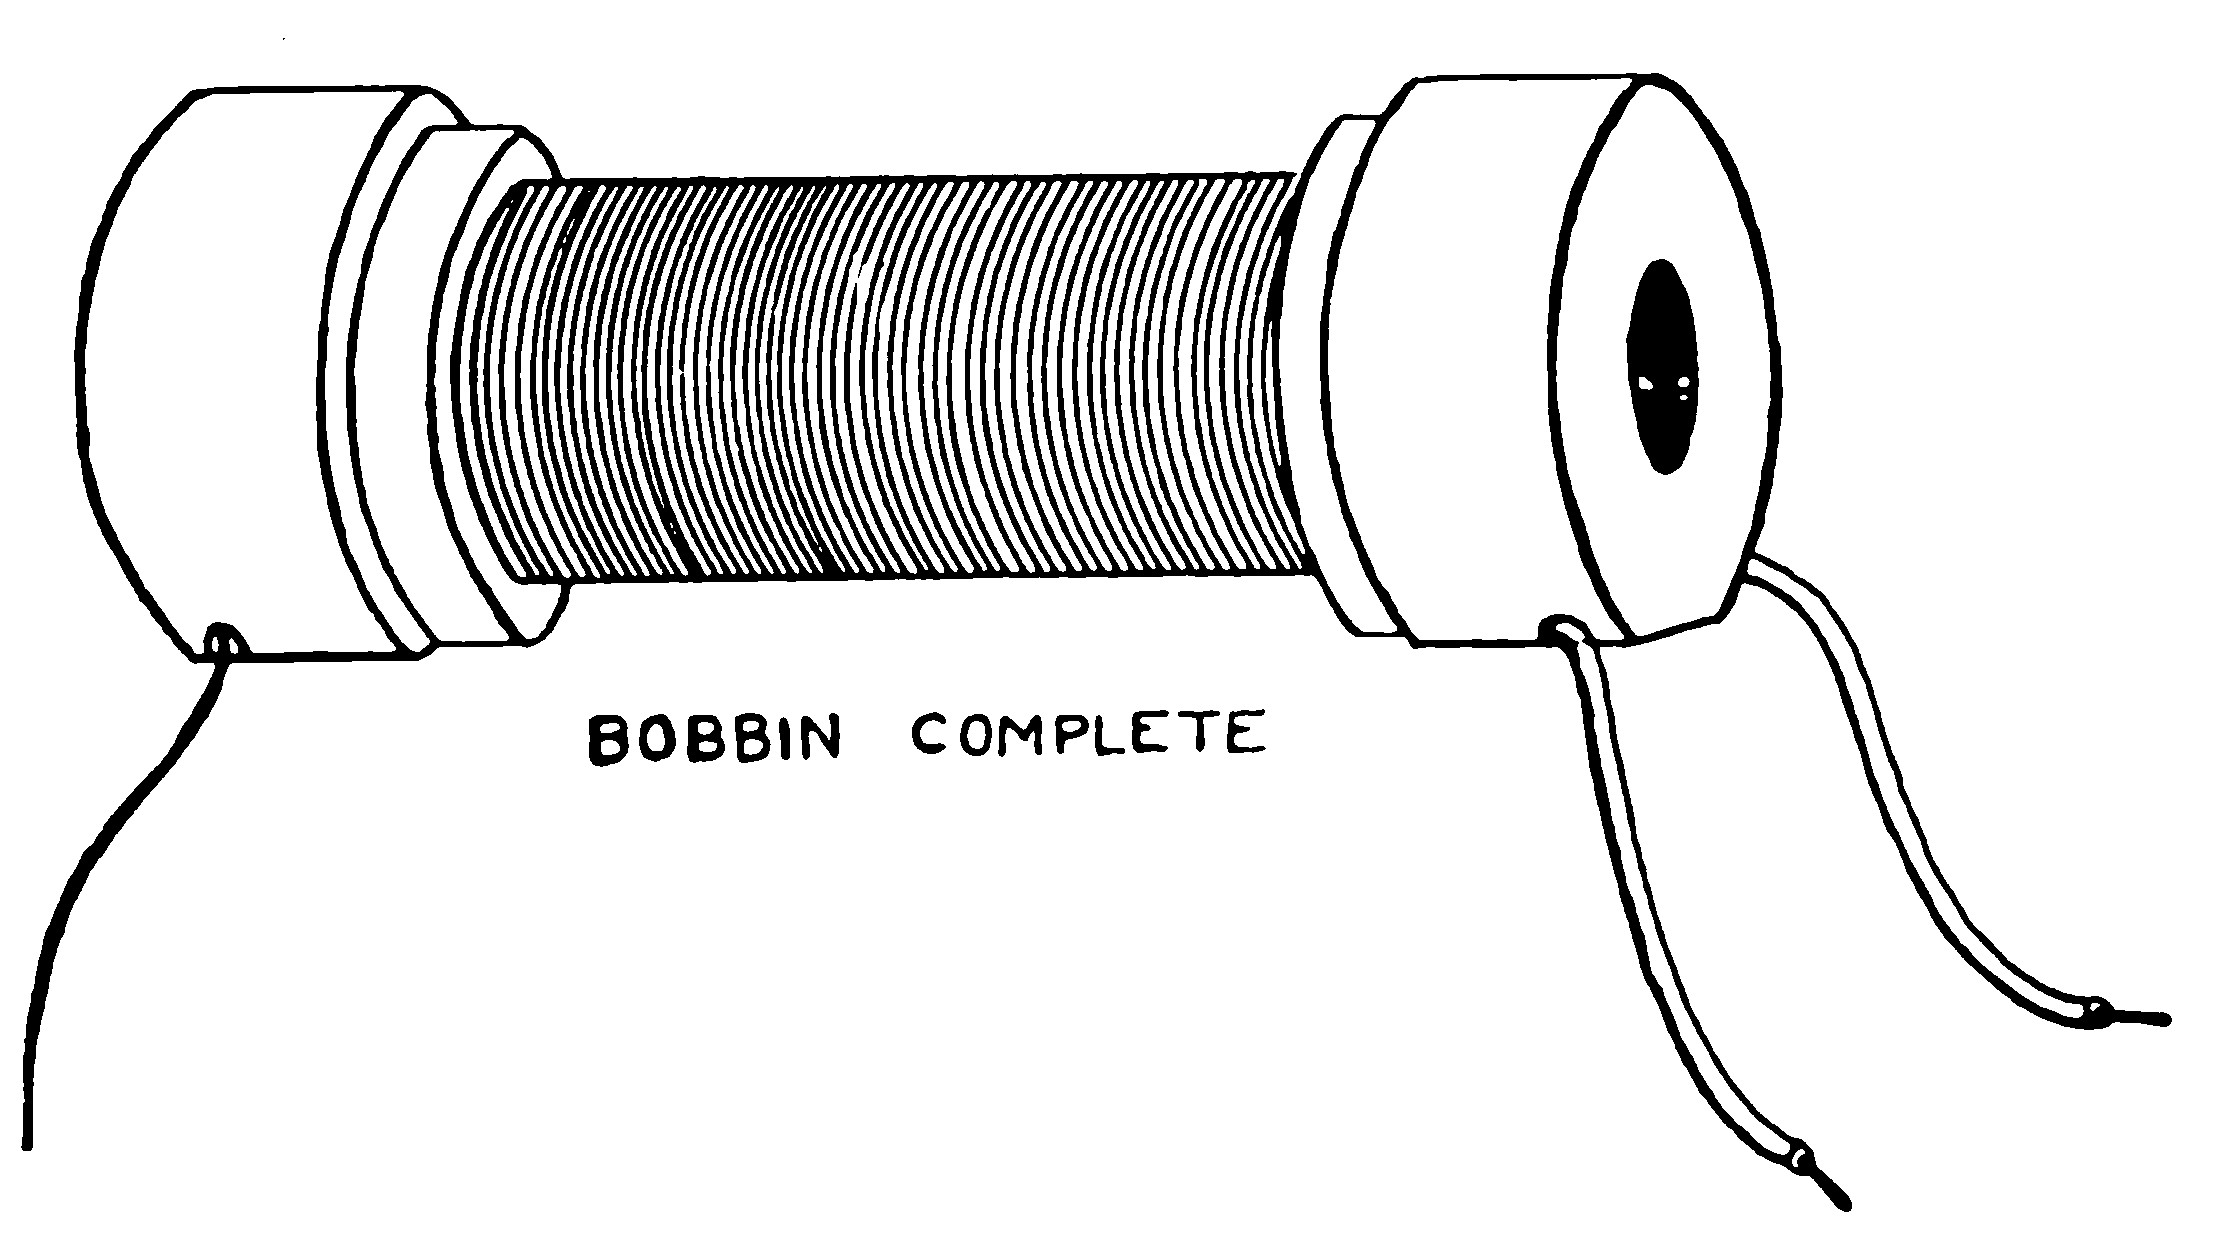 FIG. 99.—Bobbin with Winding.